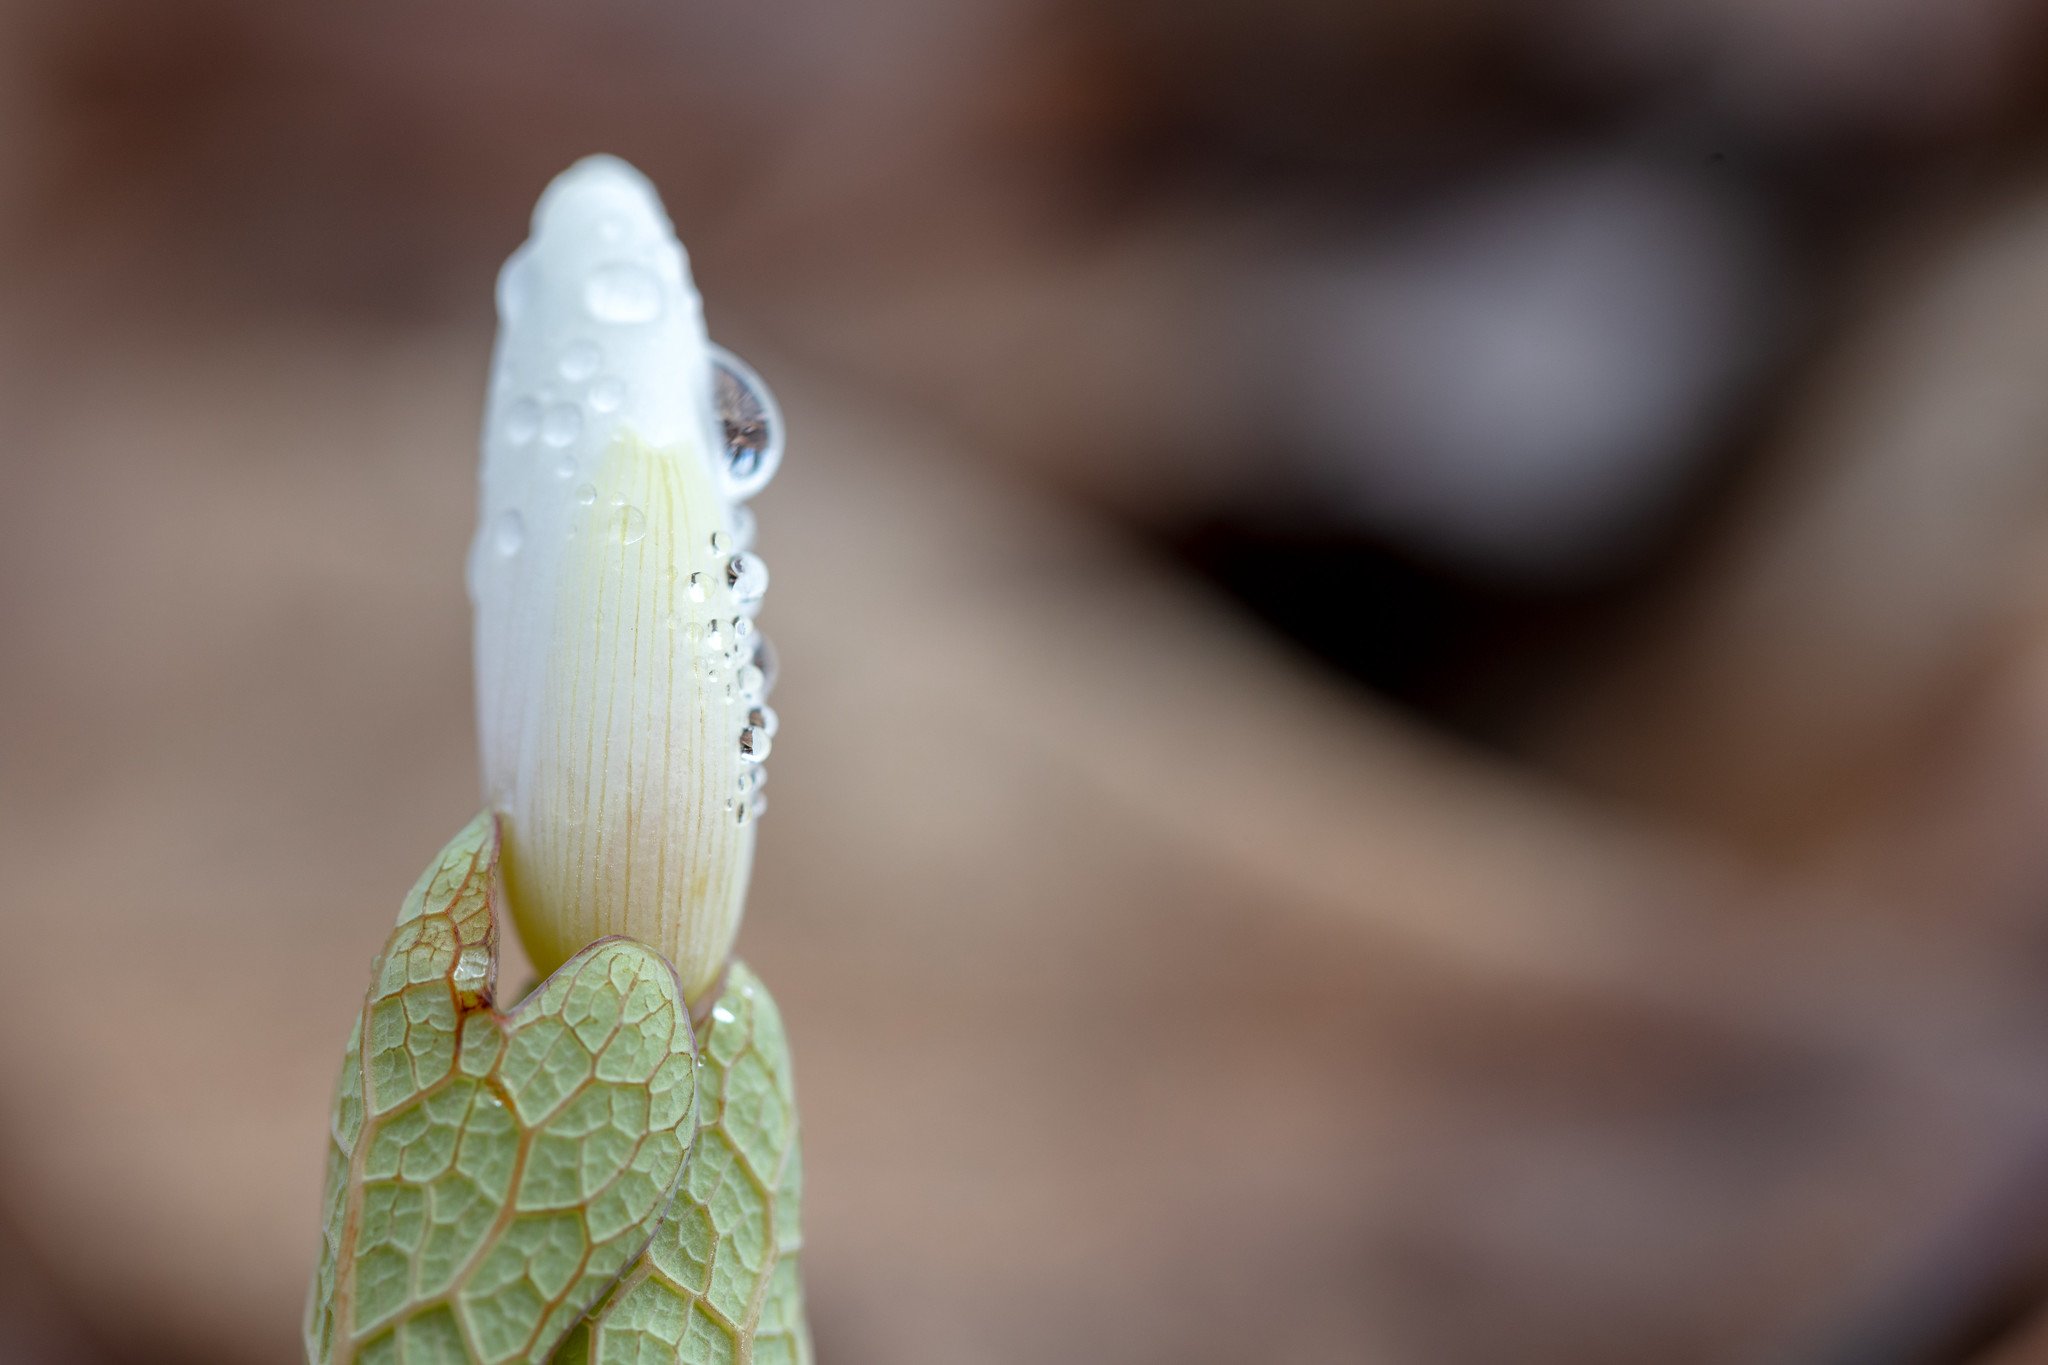 Bloodroot wildflower bud with raindrops in Aitkin County, Minnesota